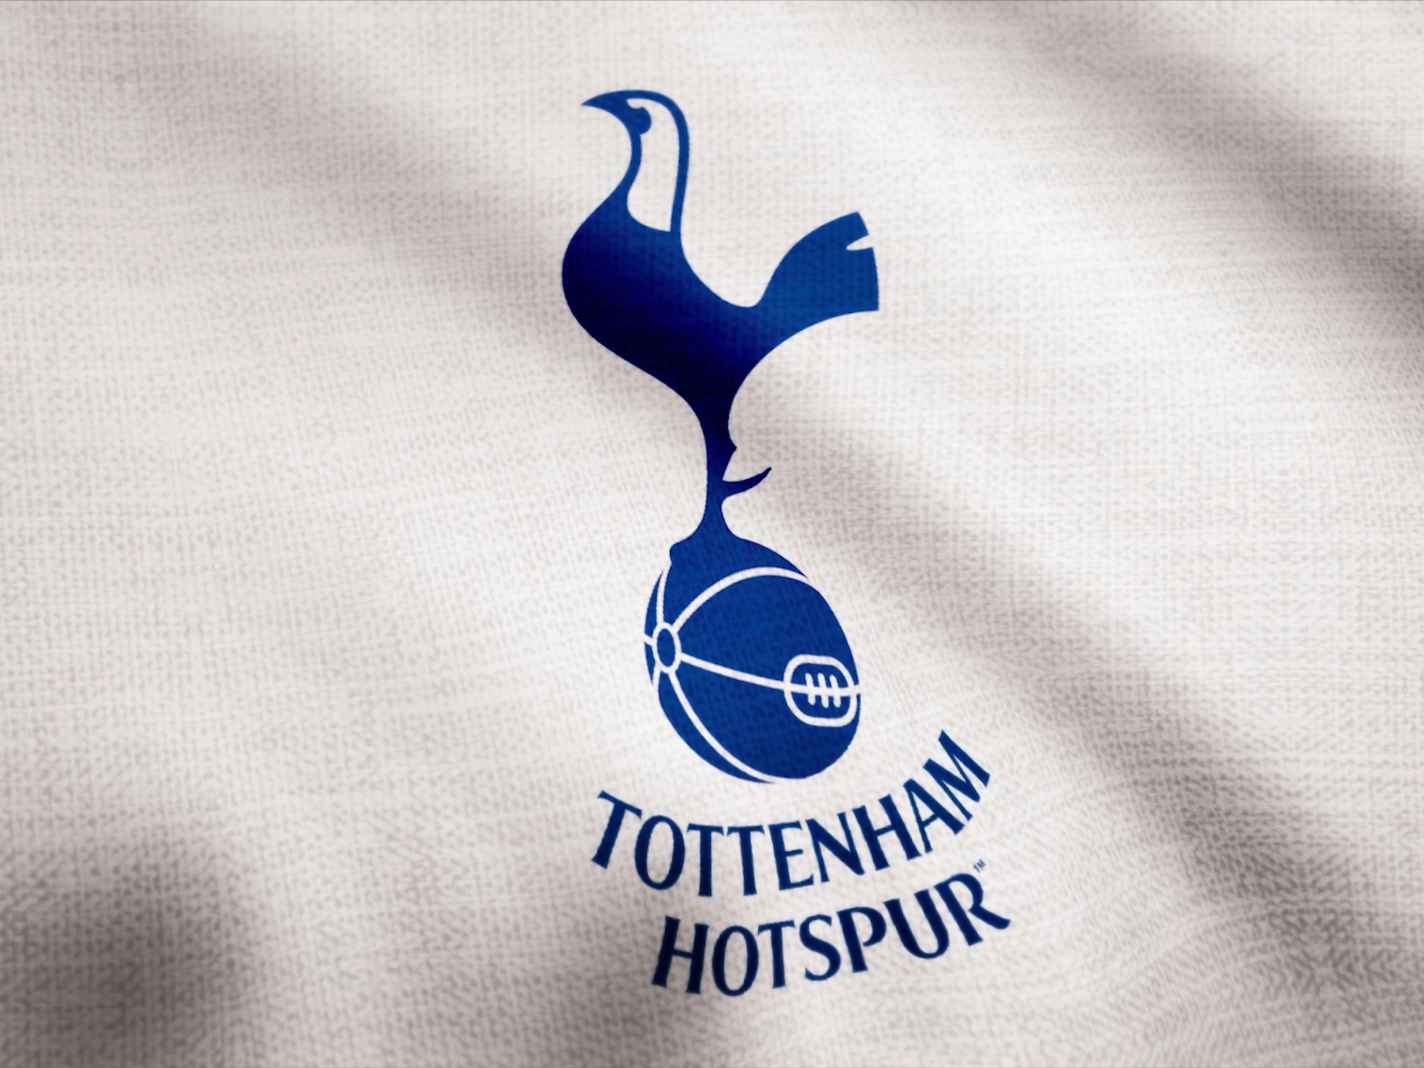 23/24 Tottenham Home Kit with Holsten Instead of AIA as Sponsor is an Instant Hit